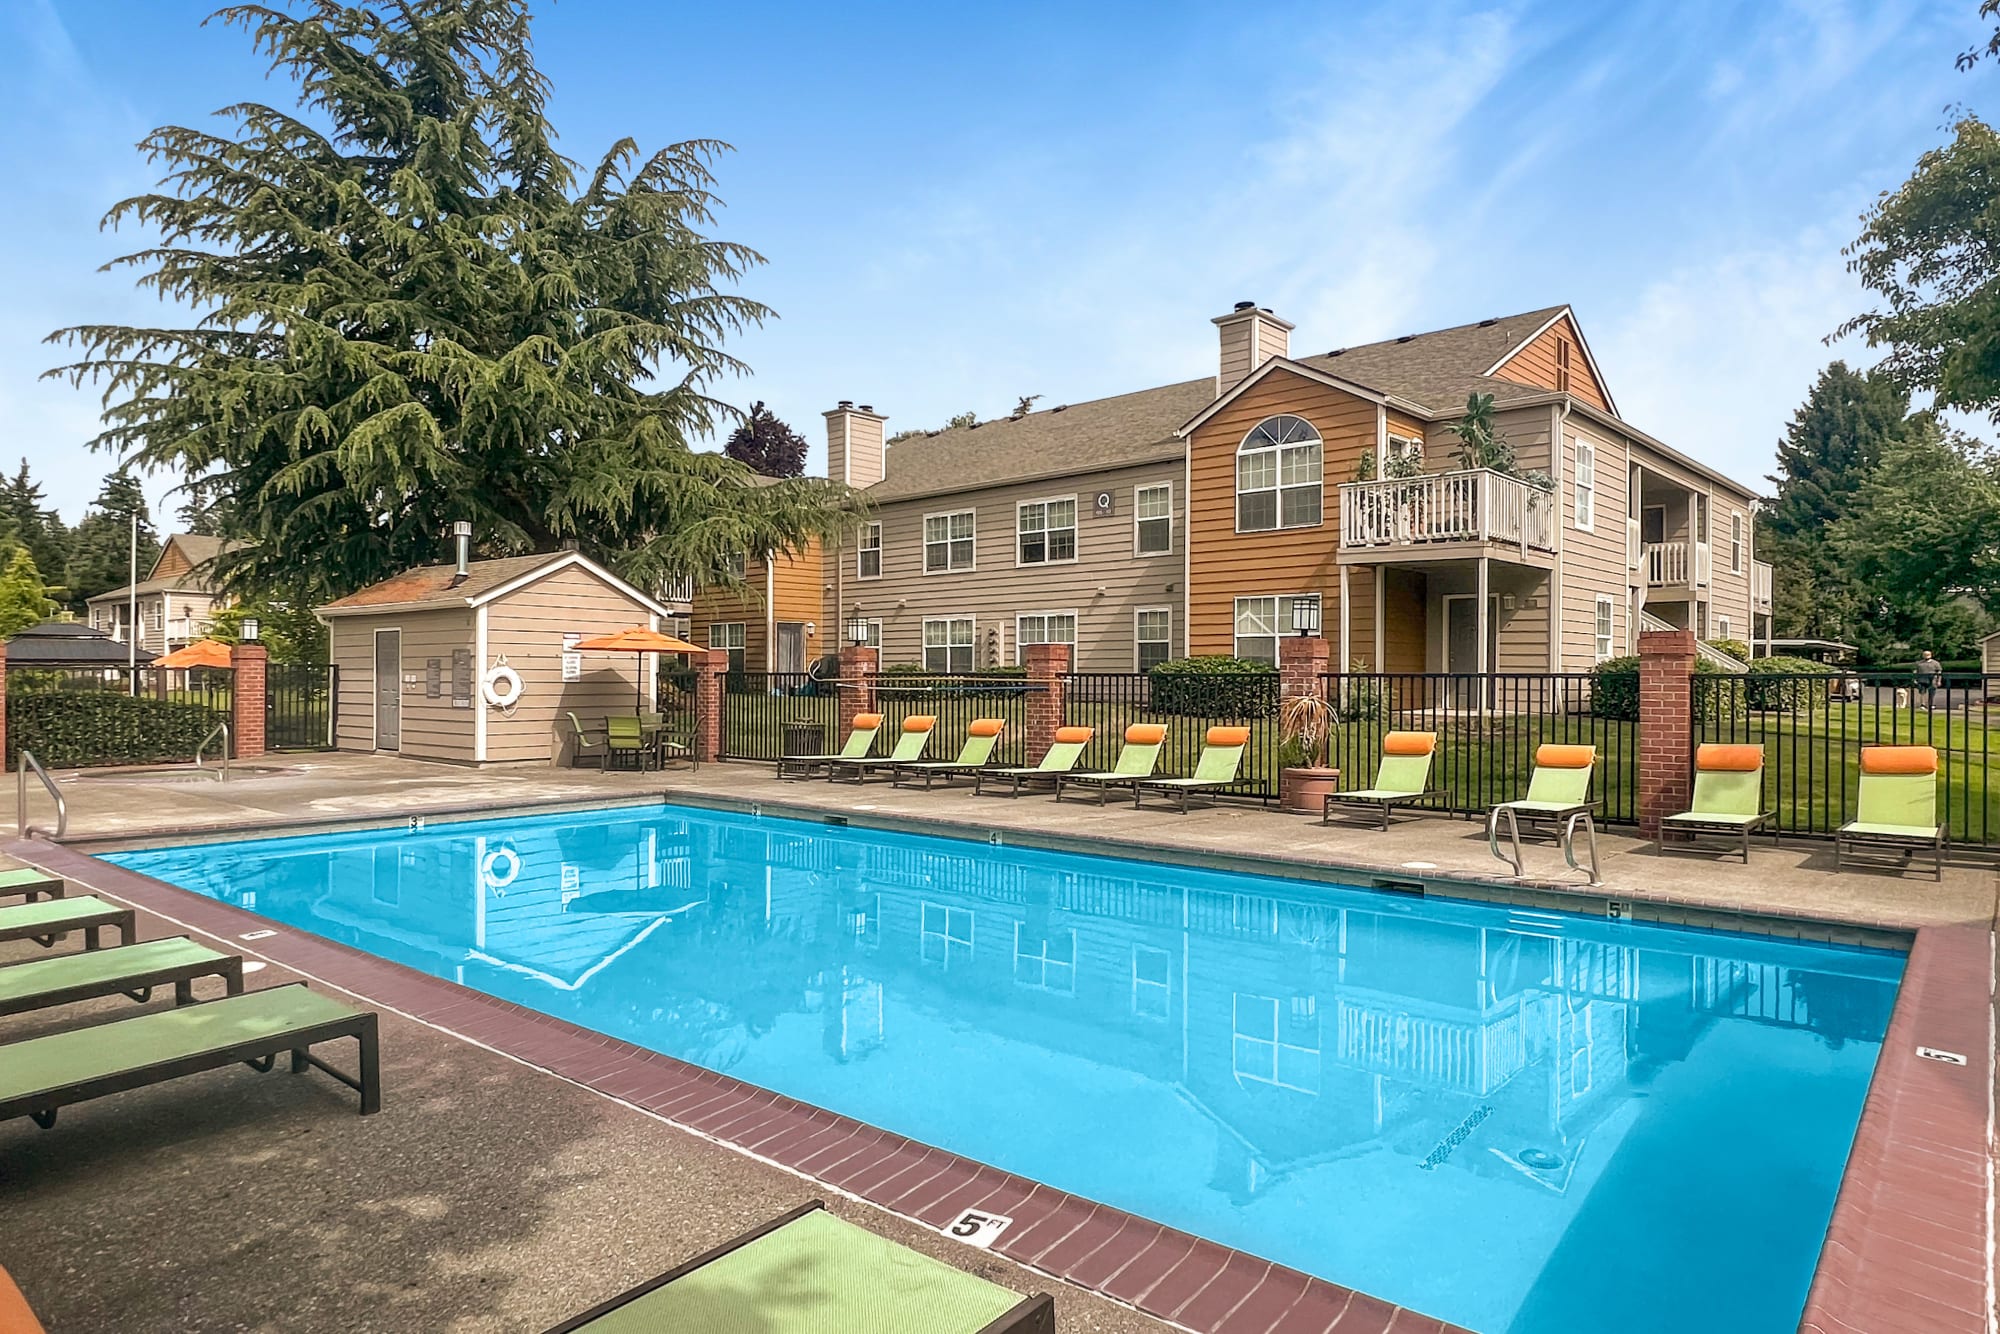 Lounge chairs by the pool at Carriage Park Apartments in Vancouver, Washington